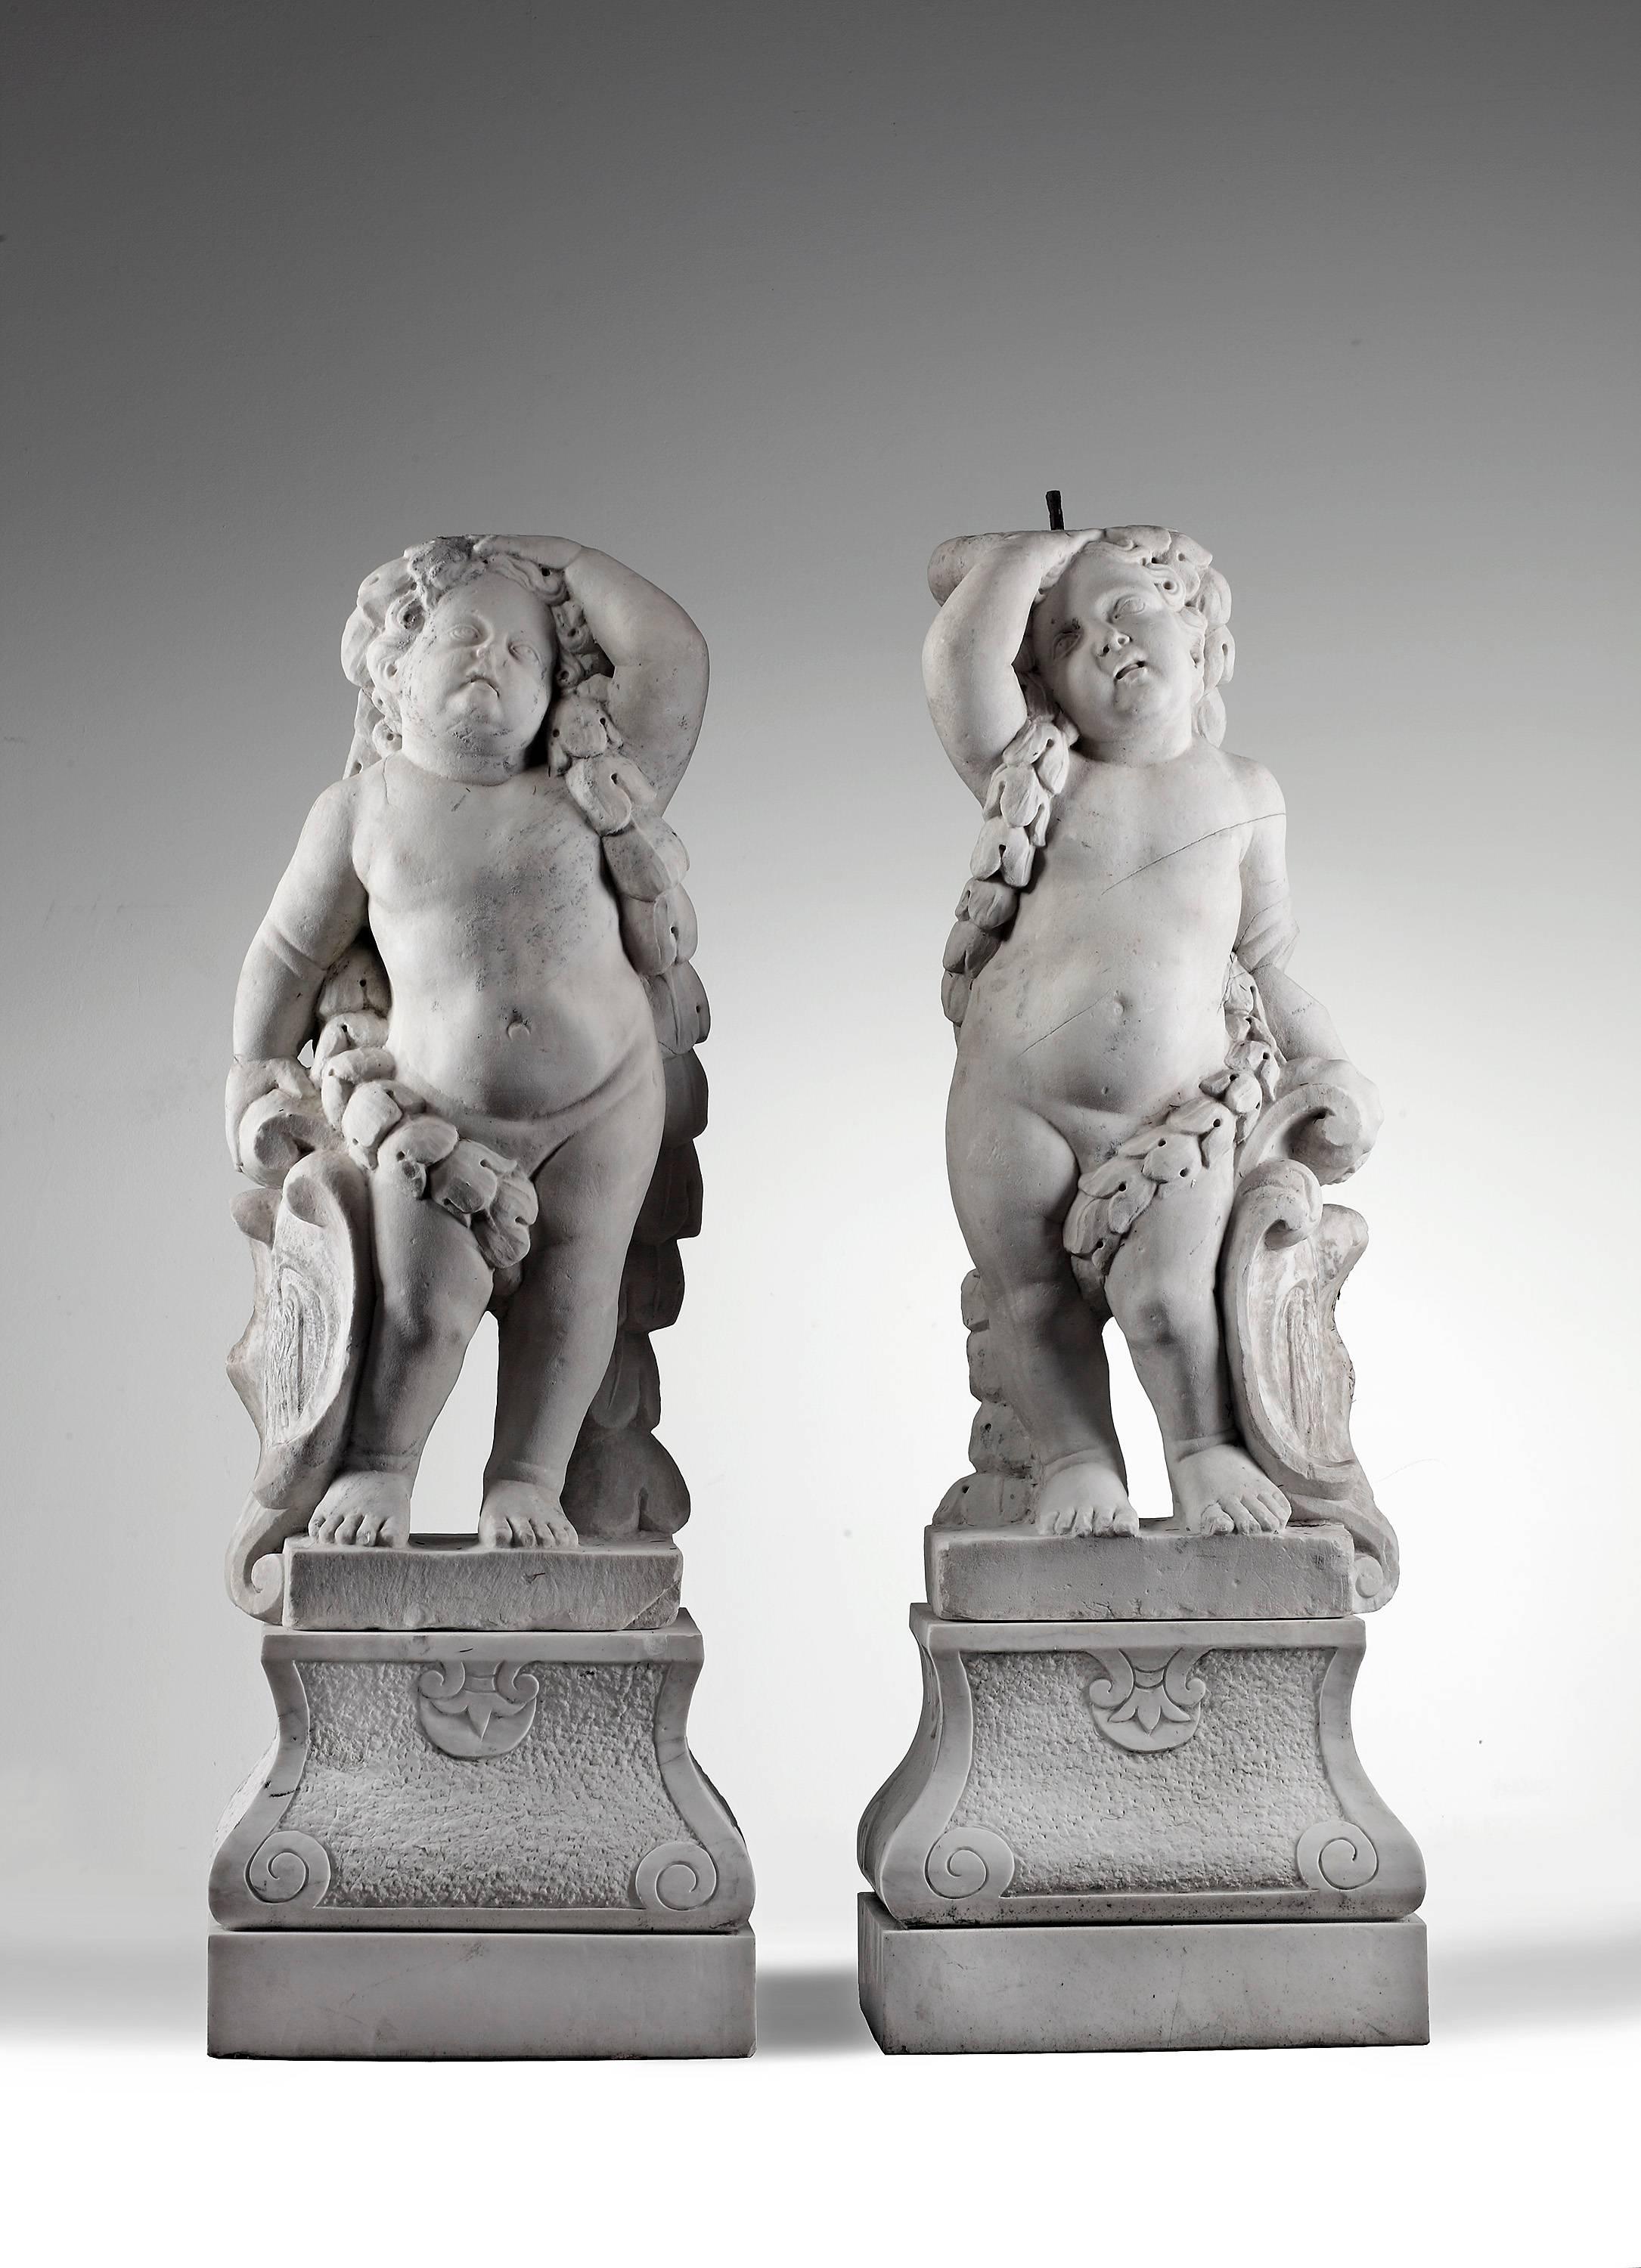 These putti were made in the late 17th century by a Flemish artist.
The putti are portrayed standing opposing and nude. They each have a floral garland draped from one shoulder and around the back. They both have a shield with a coat of arms. They